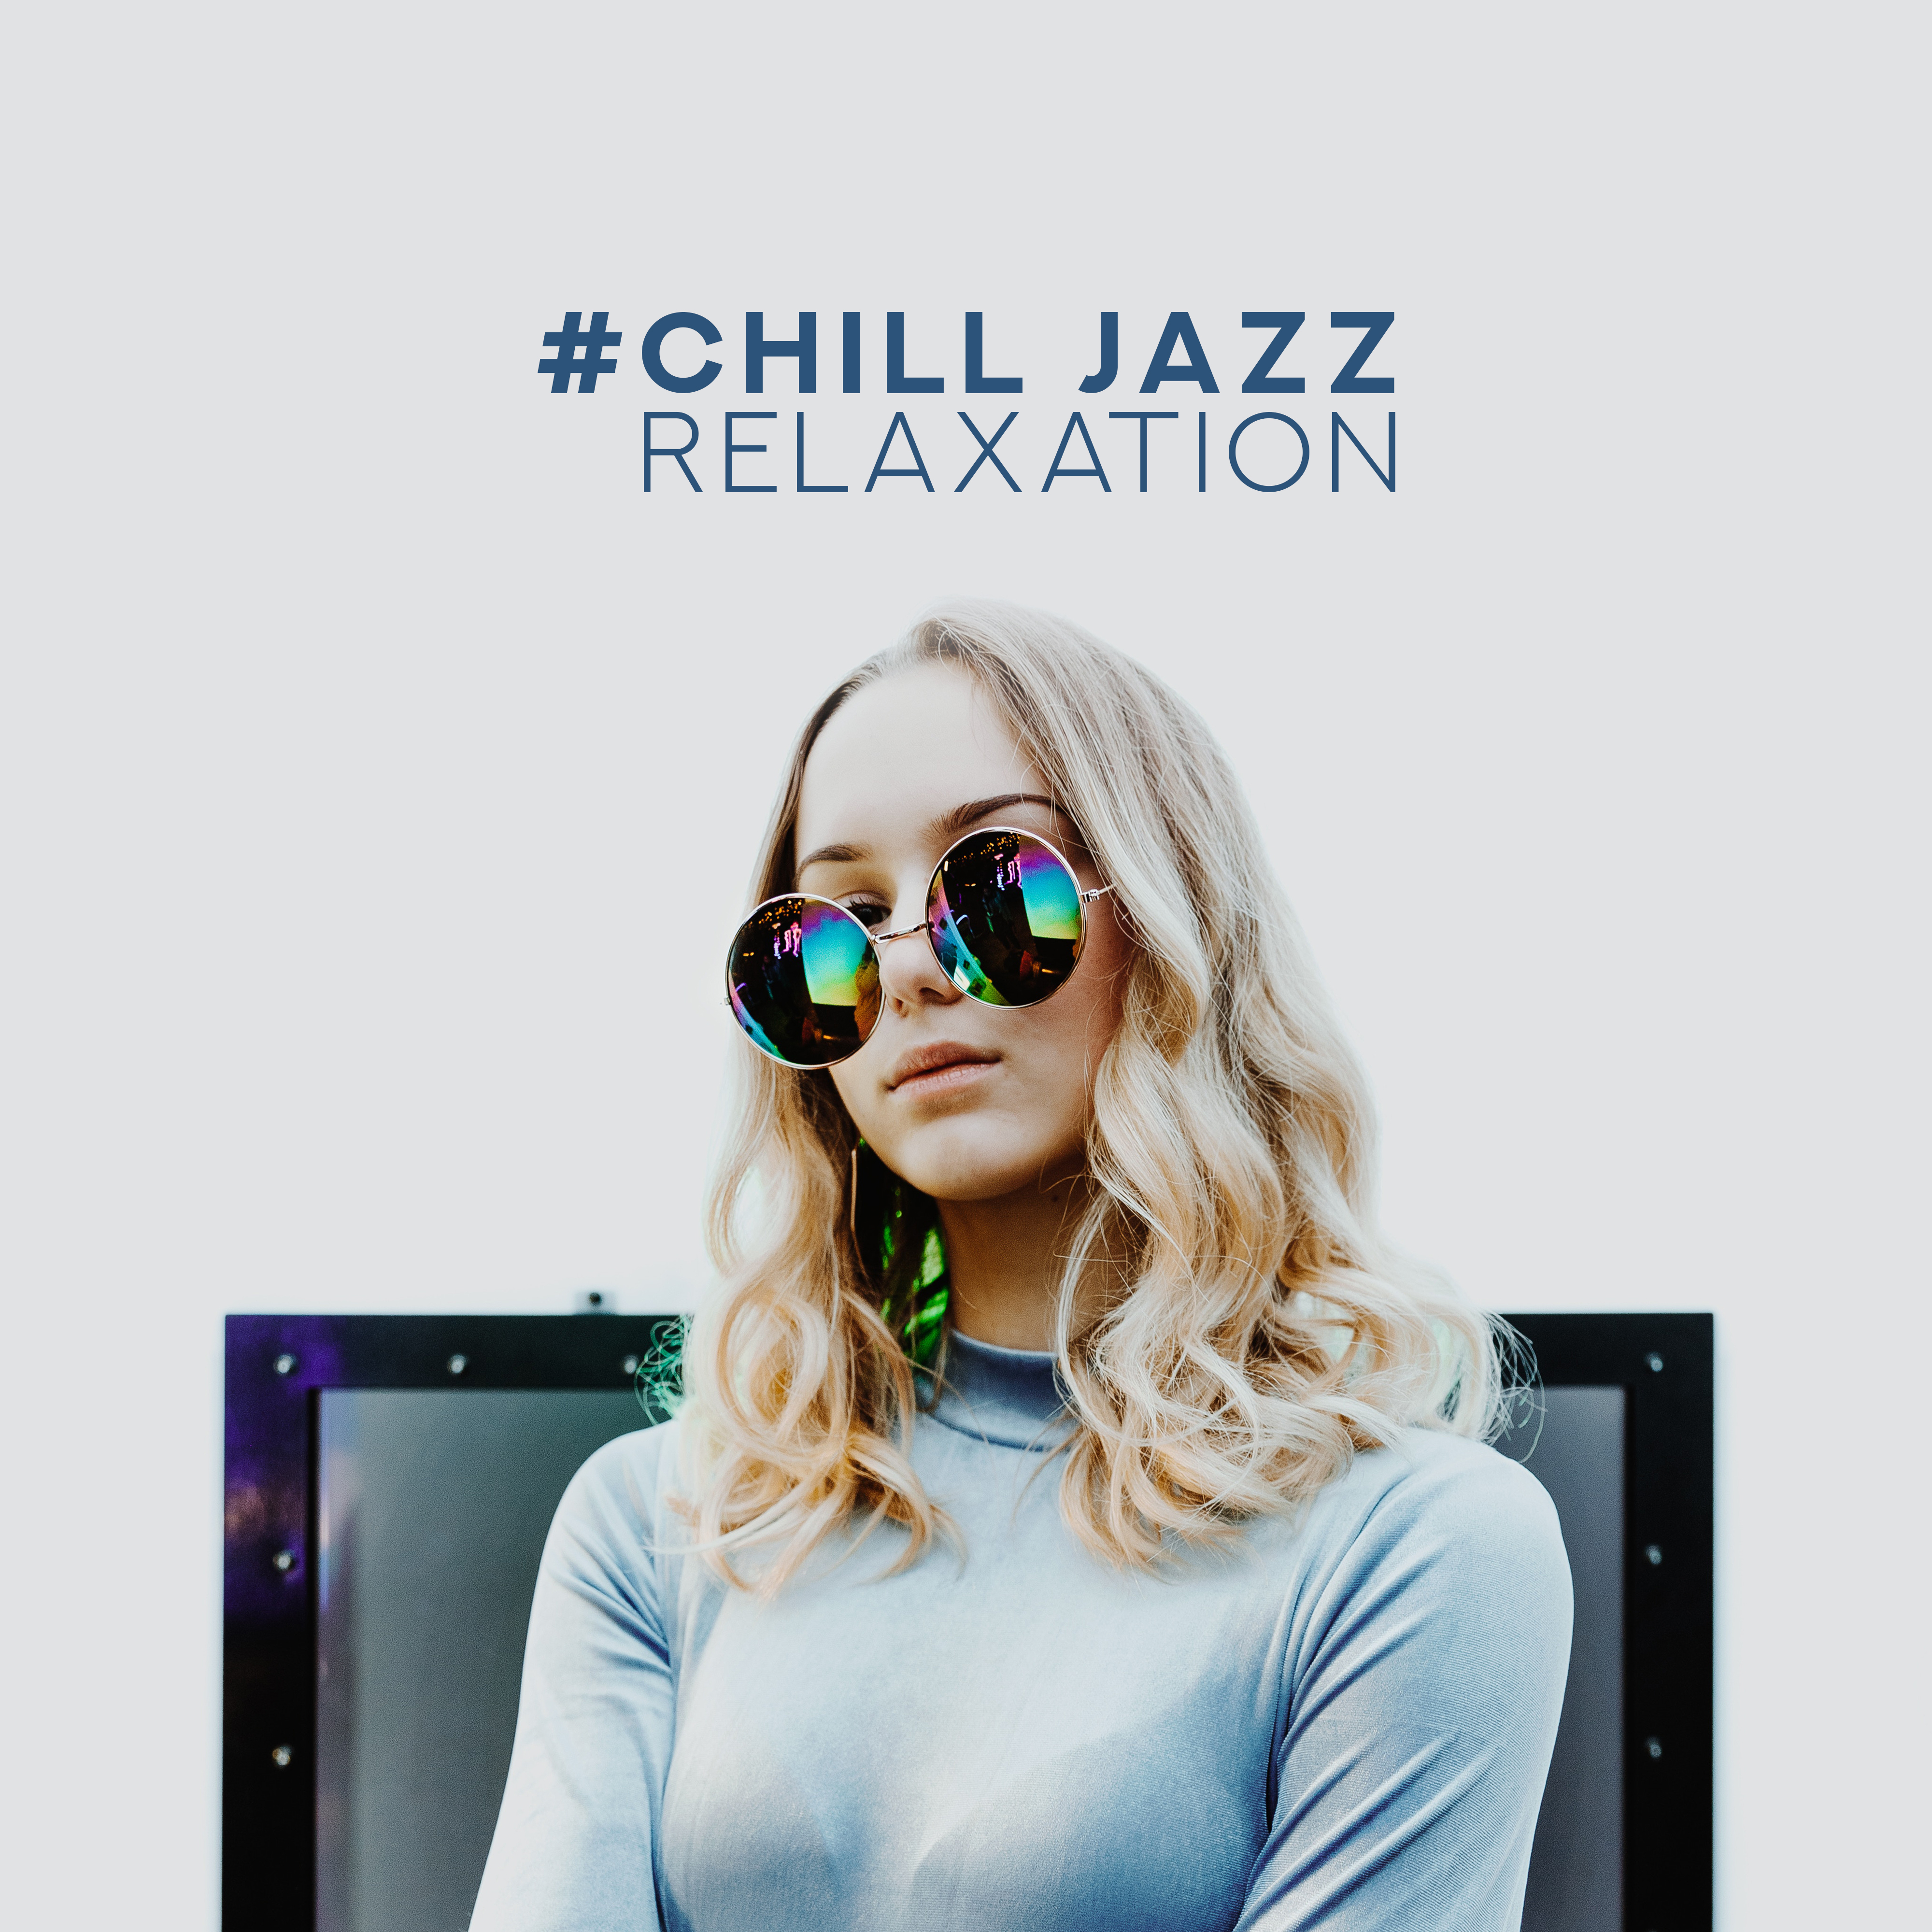 Chill Jazz Relaxation  Classical Jazz, Mellow Jazz Music for Restaurant, Relaxation, Calm Down, Dinner Songs, Jazz Coffee, Therapeutic Jazz